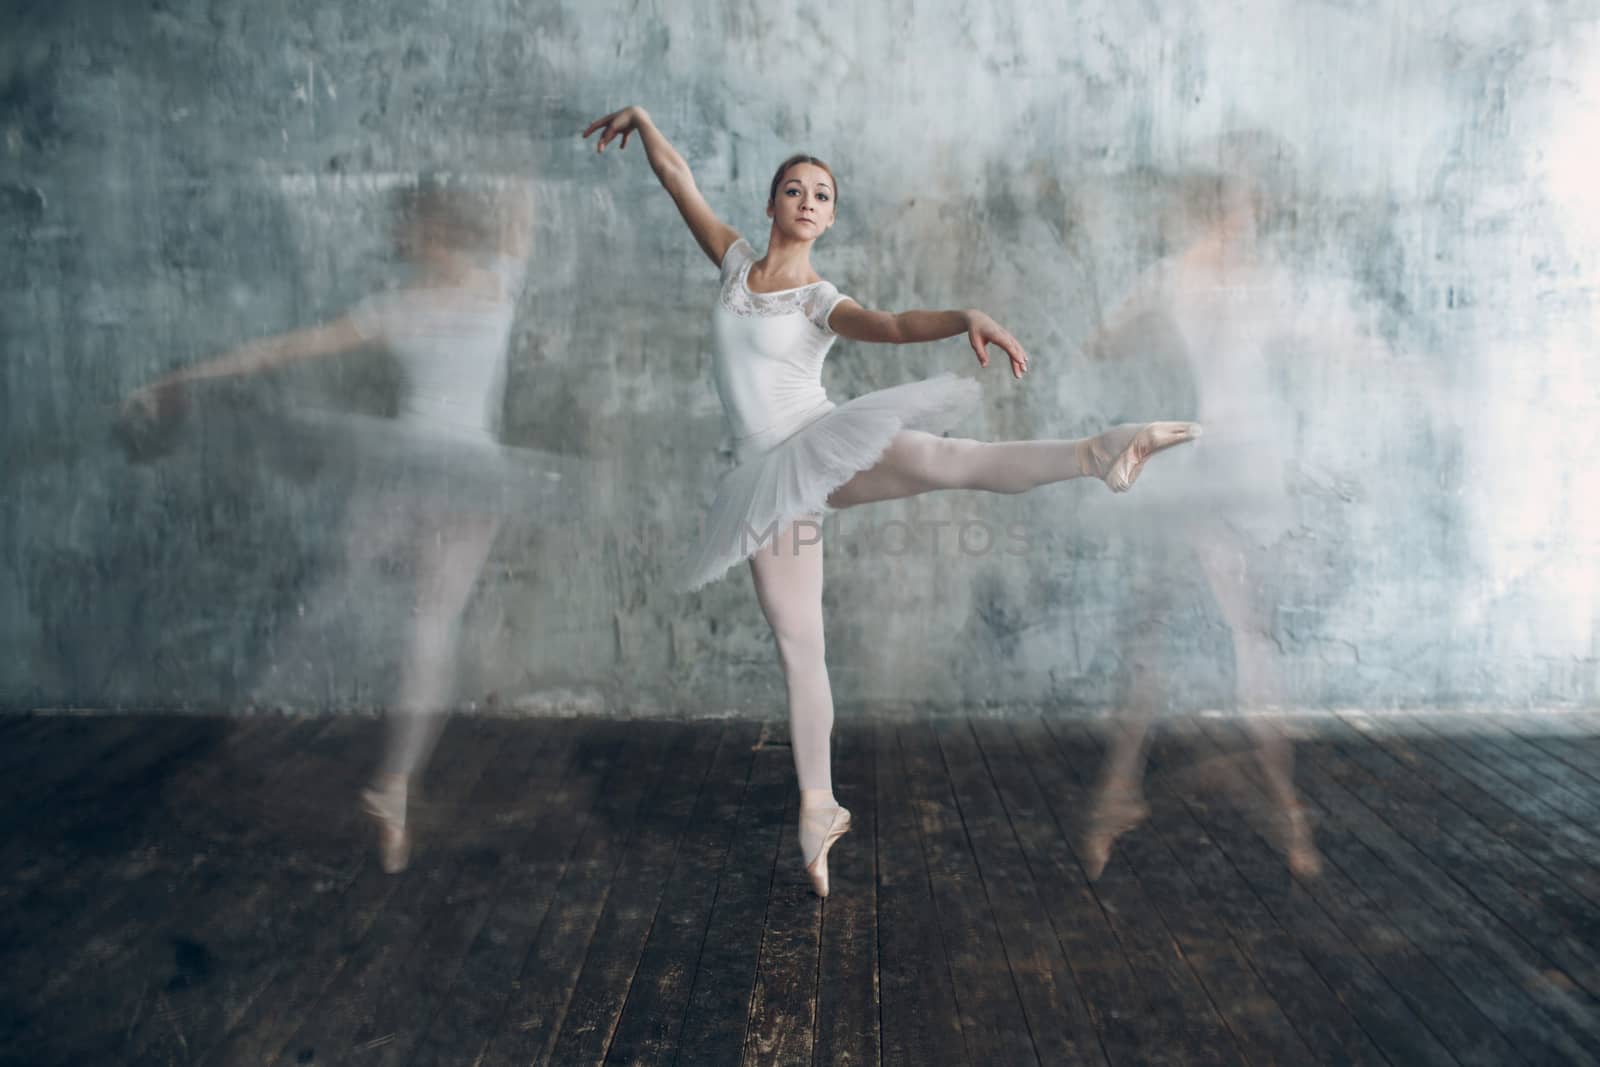 Ballerina female. Young beautiful woman ballet dancer, dressed in professional outfit, pointe shoes and white tutu. Multiple exposure.